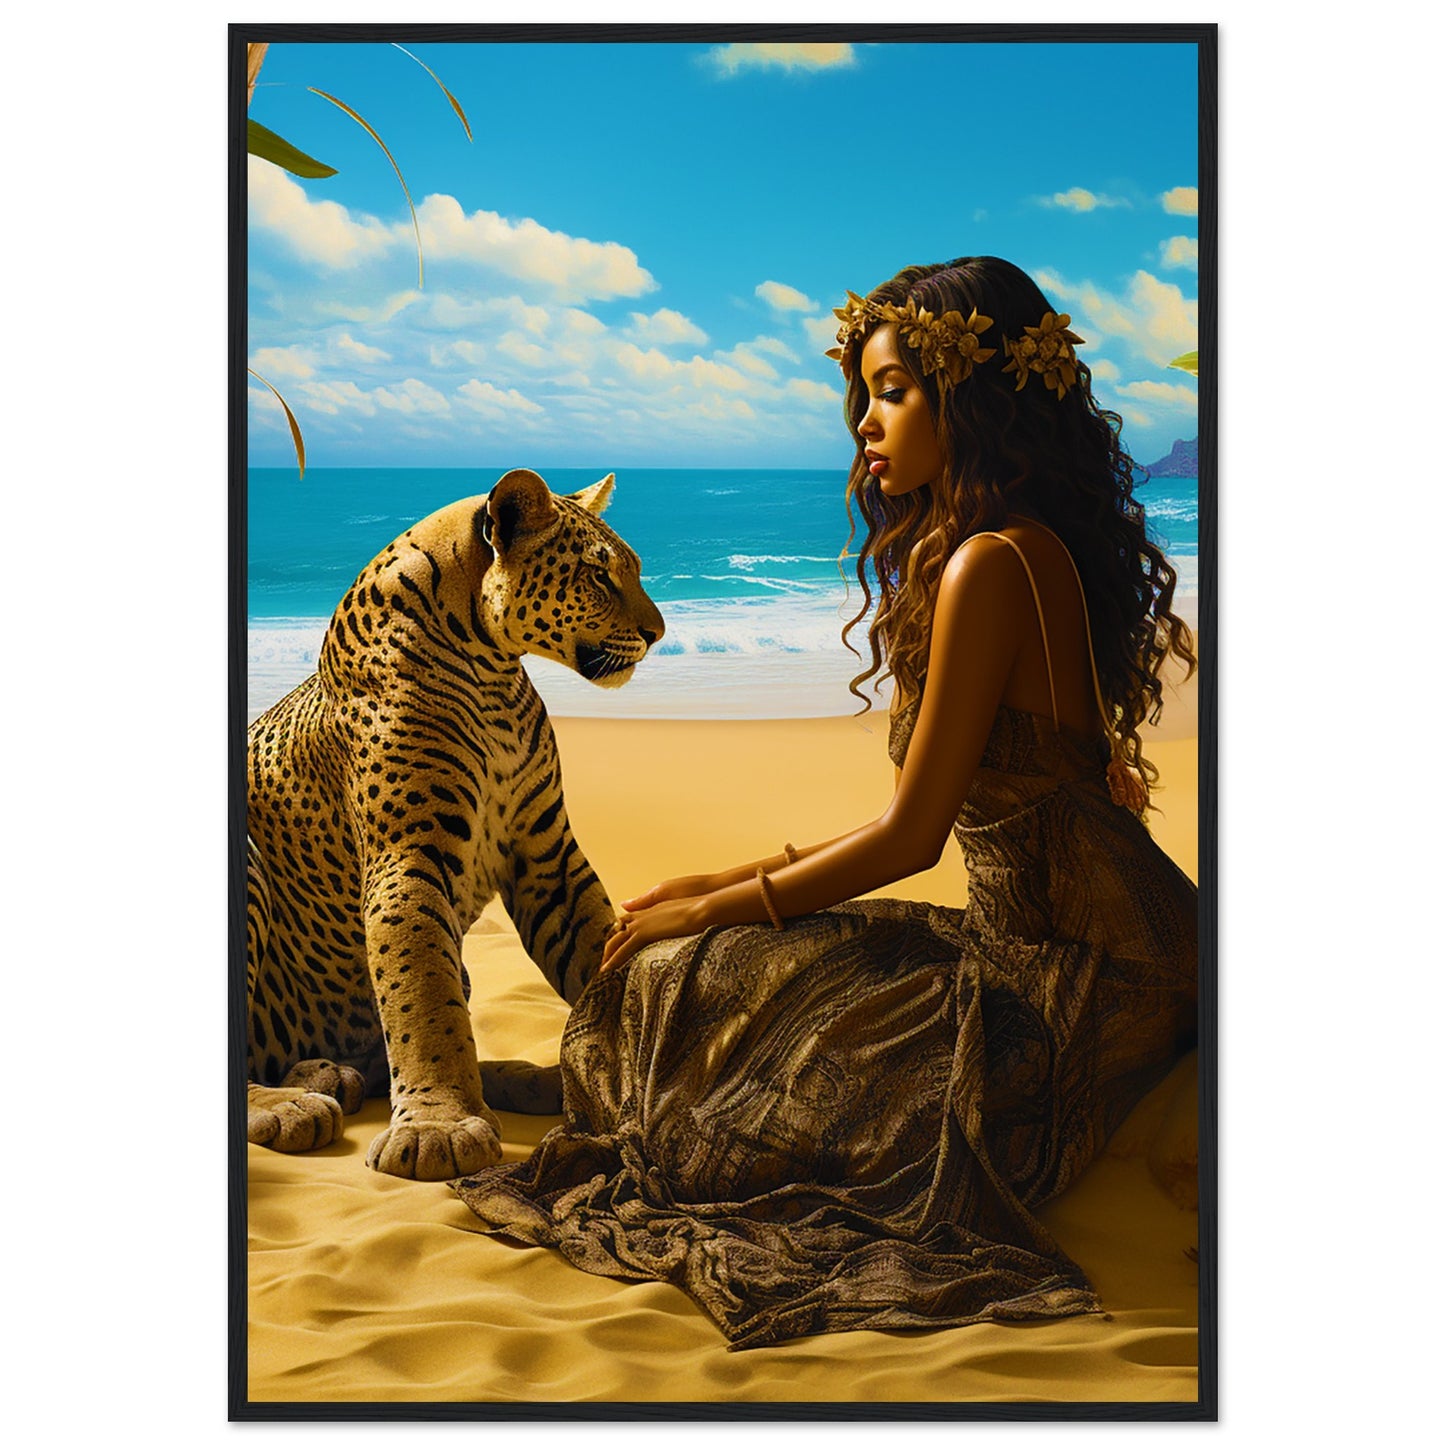 Seychelle Serenity: Golden Sand The Maiden and the LeopardClassic Semi-Glossy Paper Wooden Framed Poster